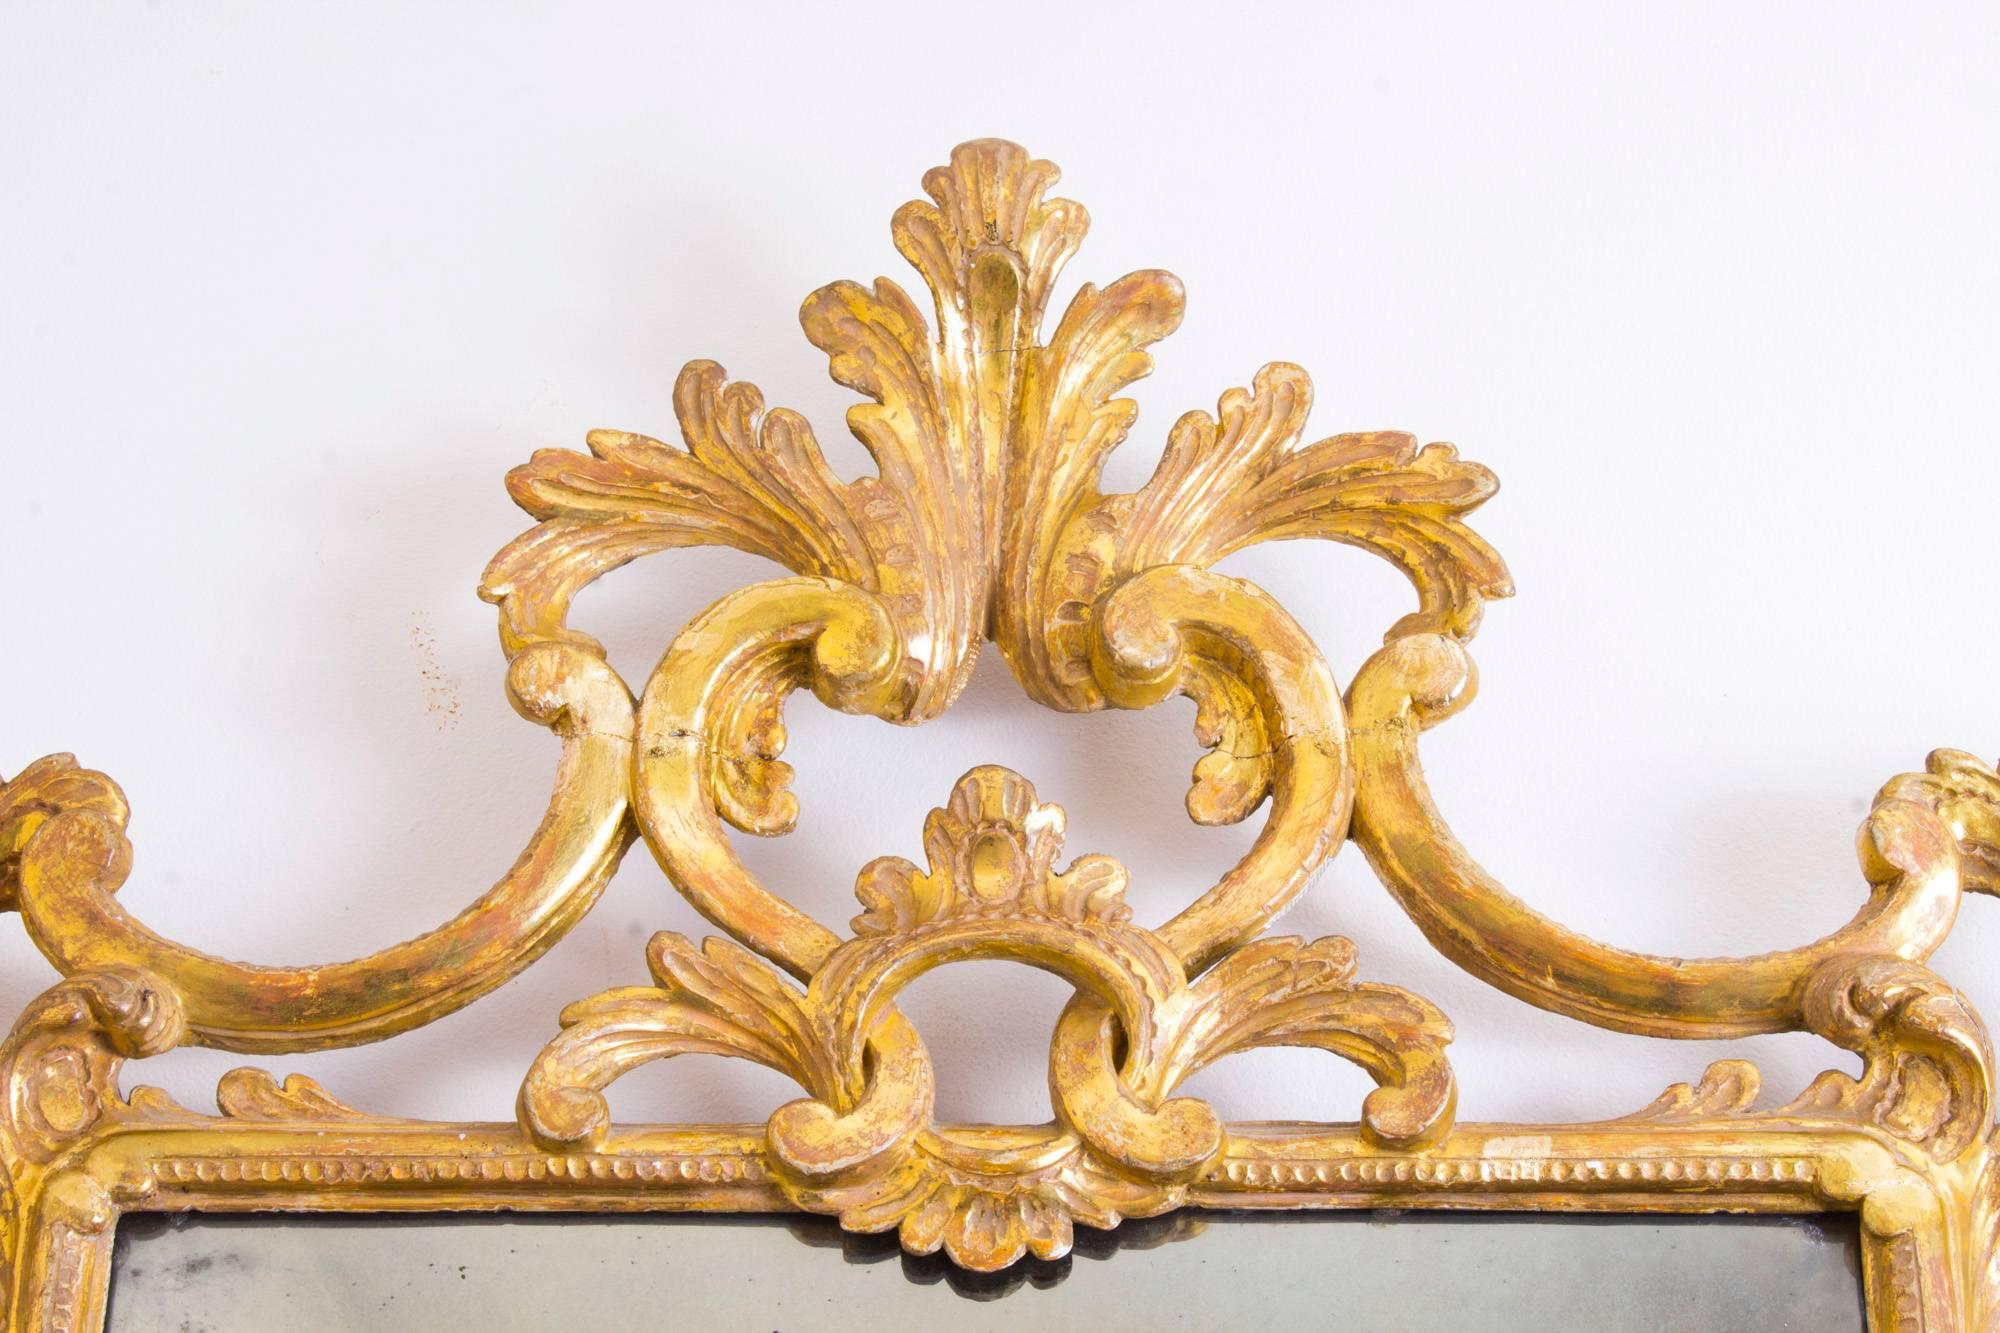 This is a superb antique Italian Florentine carved giltwood mirror, circa 1870 in date.

The rectangular original mirror plate is within a boldly-carved and pierced scrolling foliate frame within a beaded border. 

This is a very decorative item